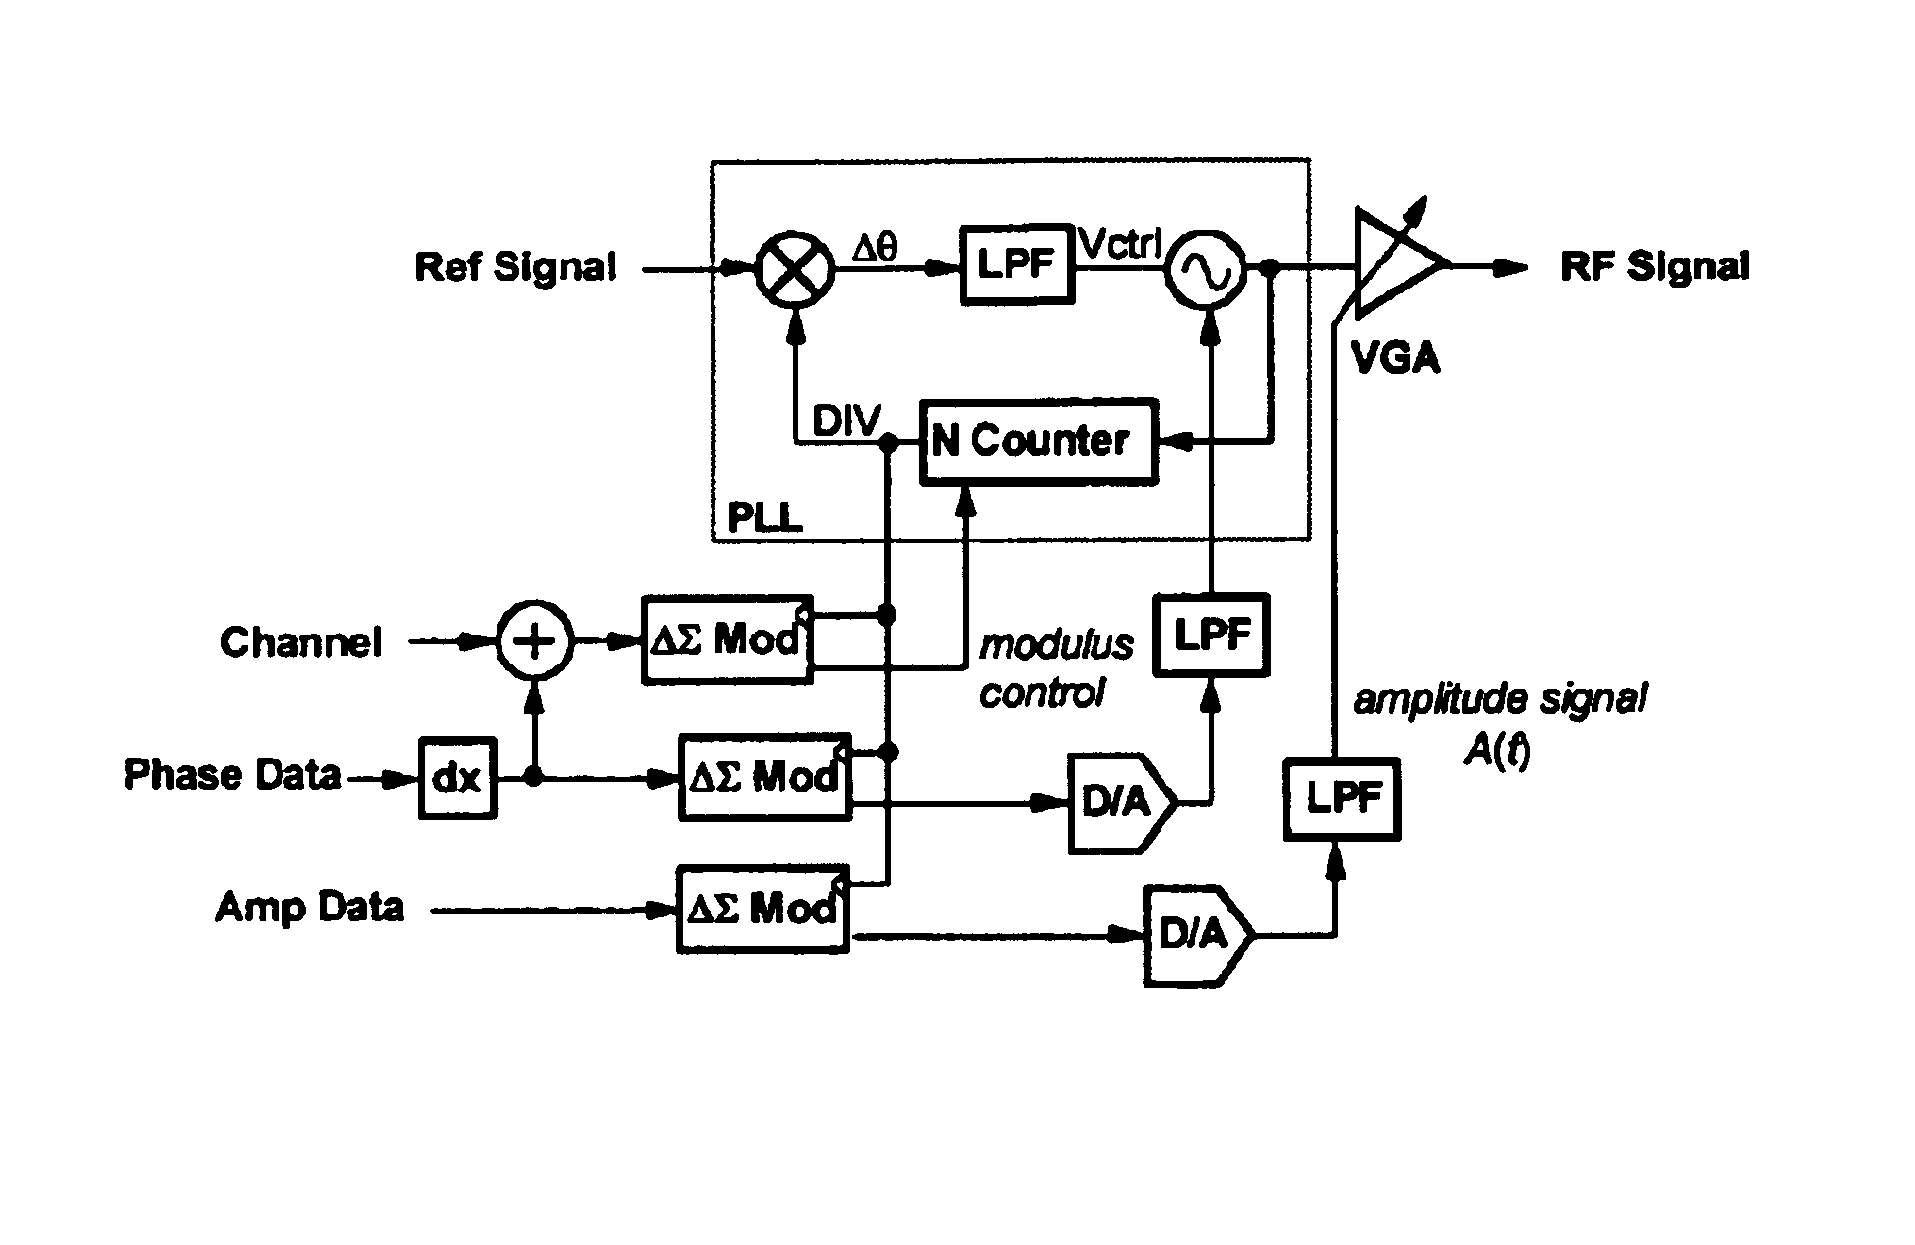 Direct synthesis transmitter